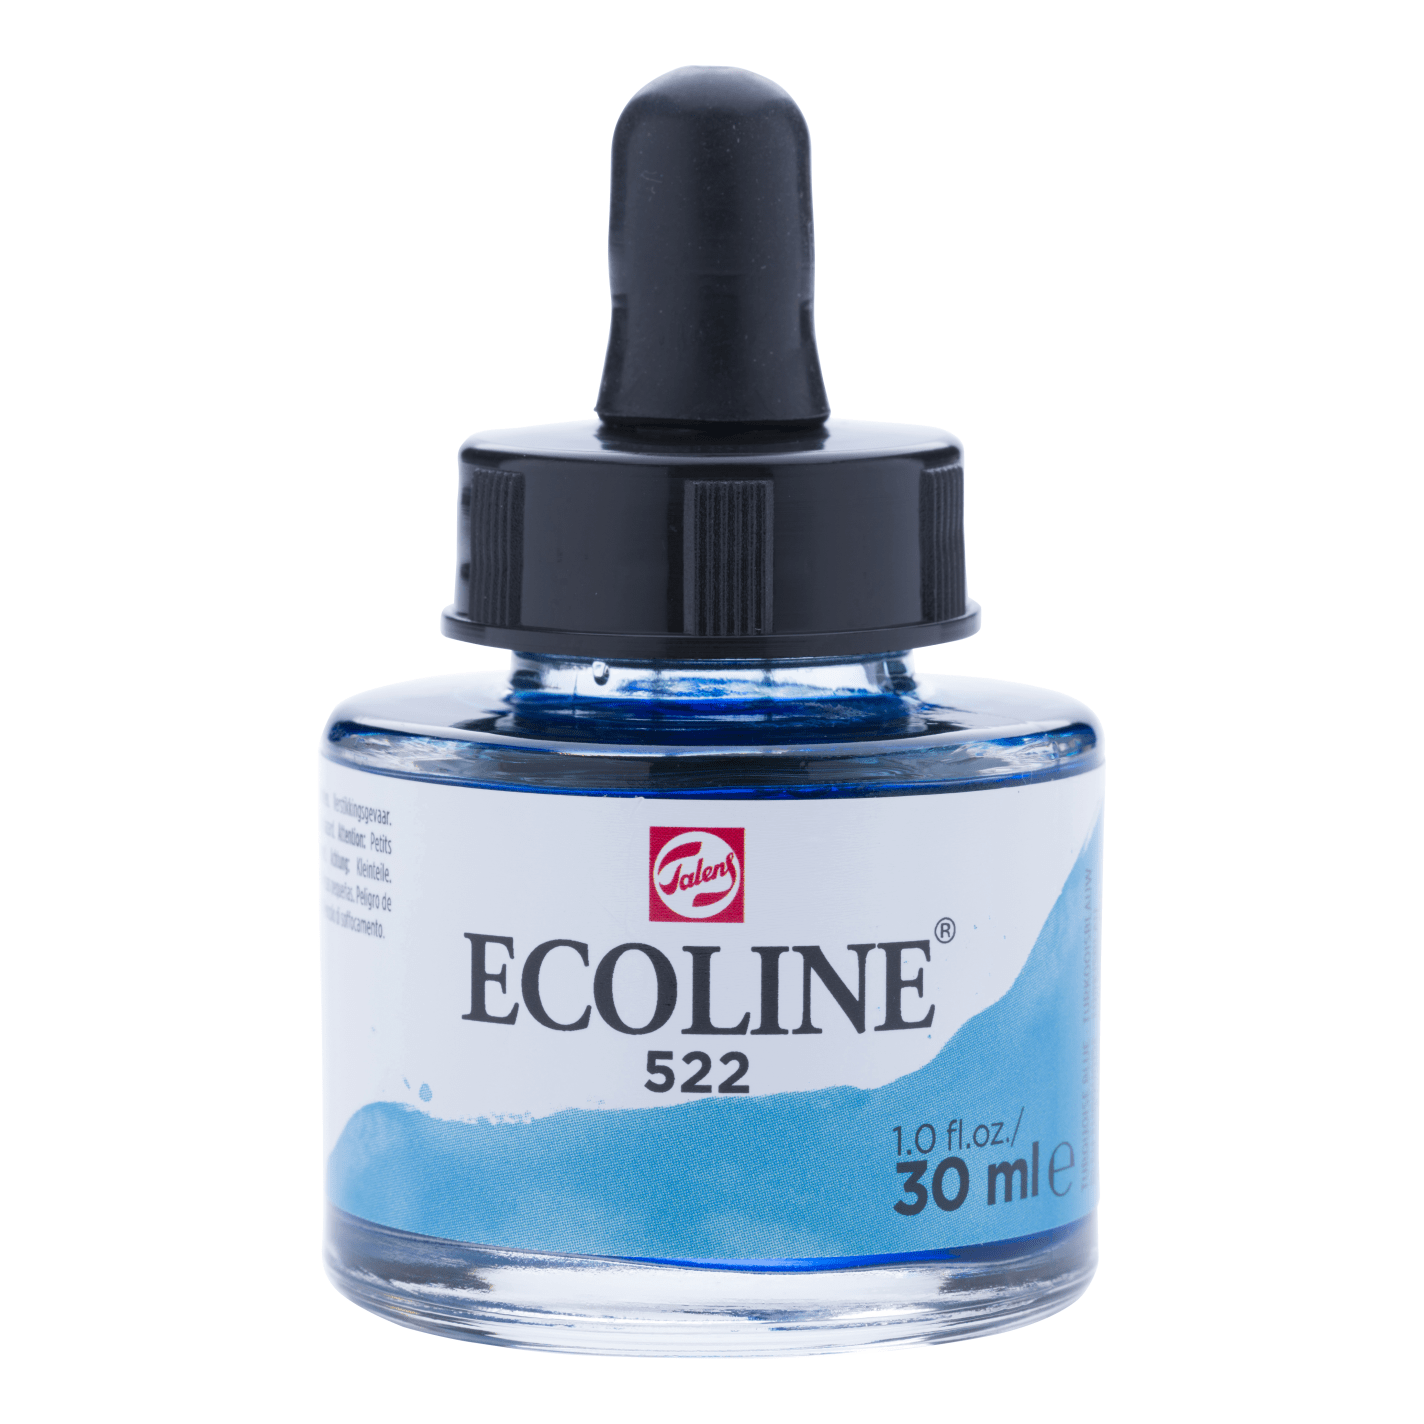 Royal Talens Ecoline 30ml Turquoise blue